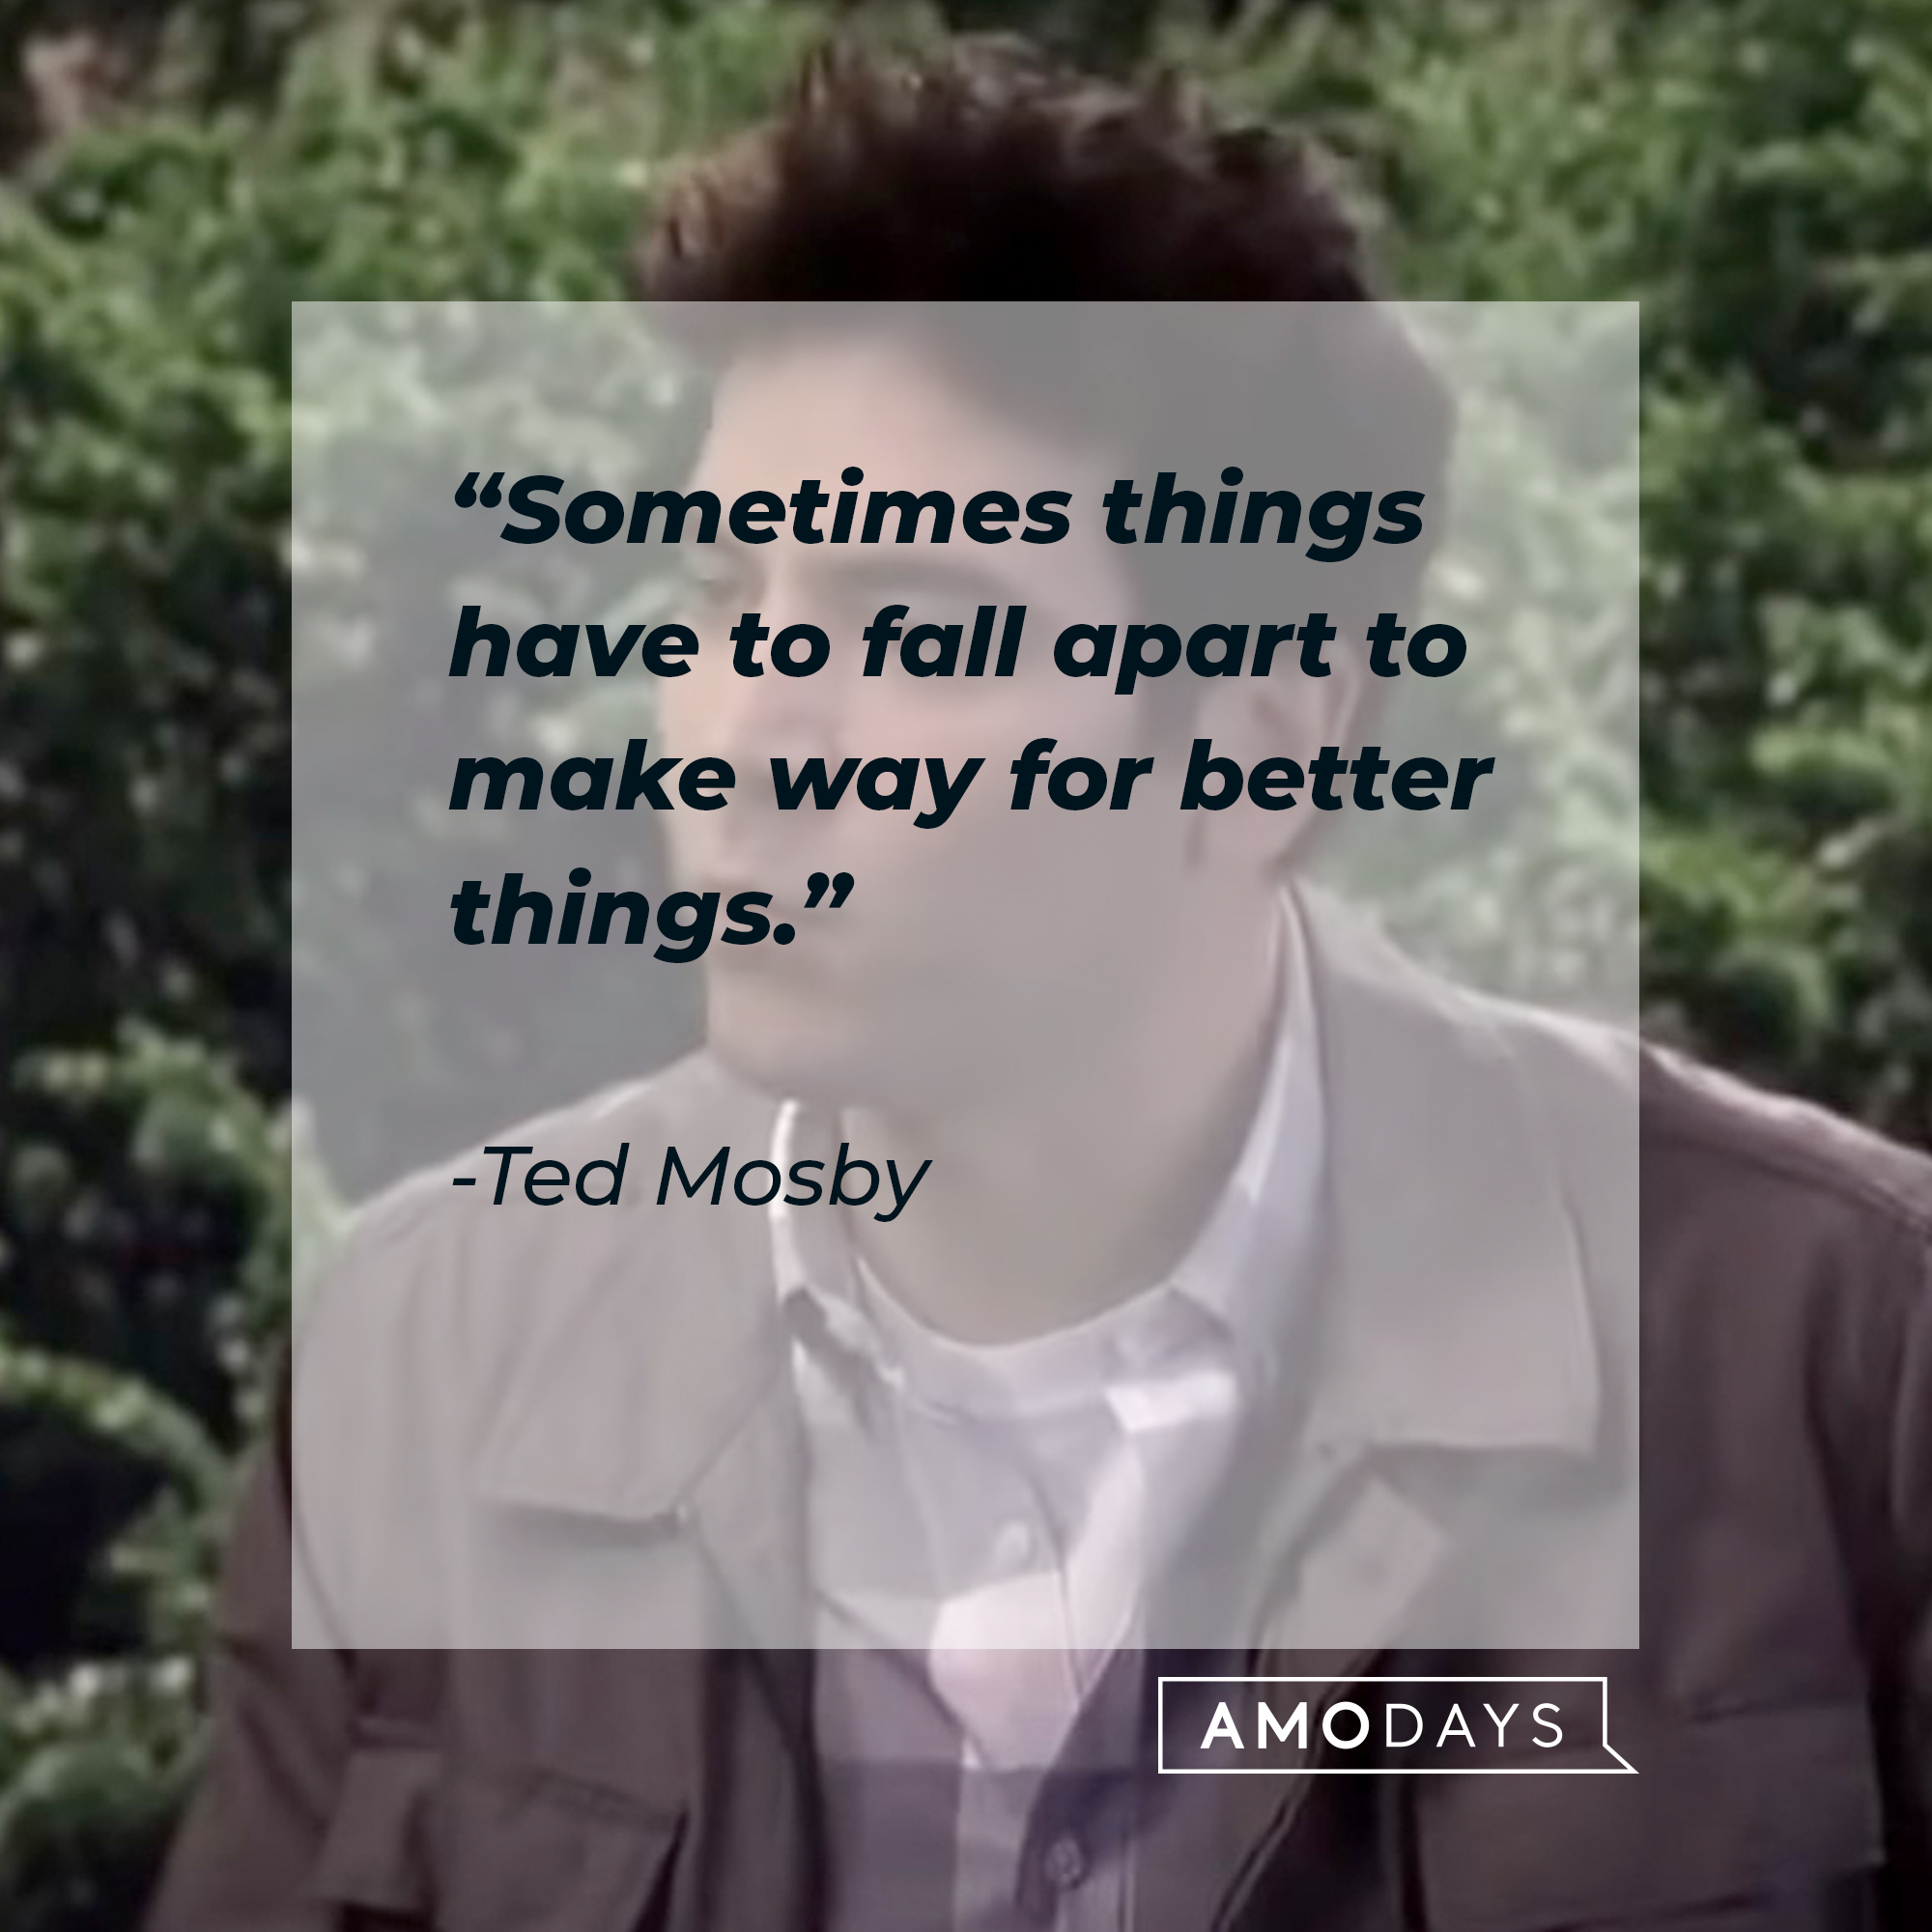 An image of Ted Mosby with his quote: “Sometimes things have to fall apart to make way for better things.” | Source: facebook.com/OfficialHowIMetYourMother